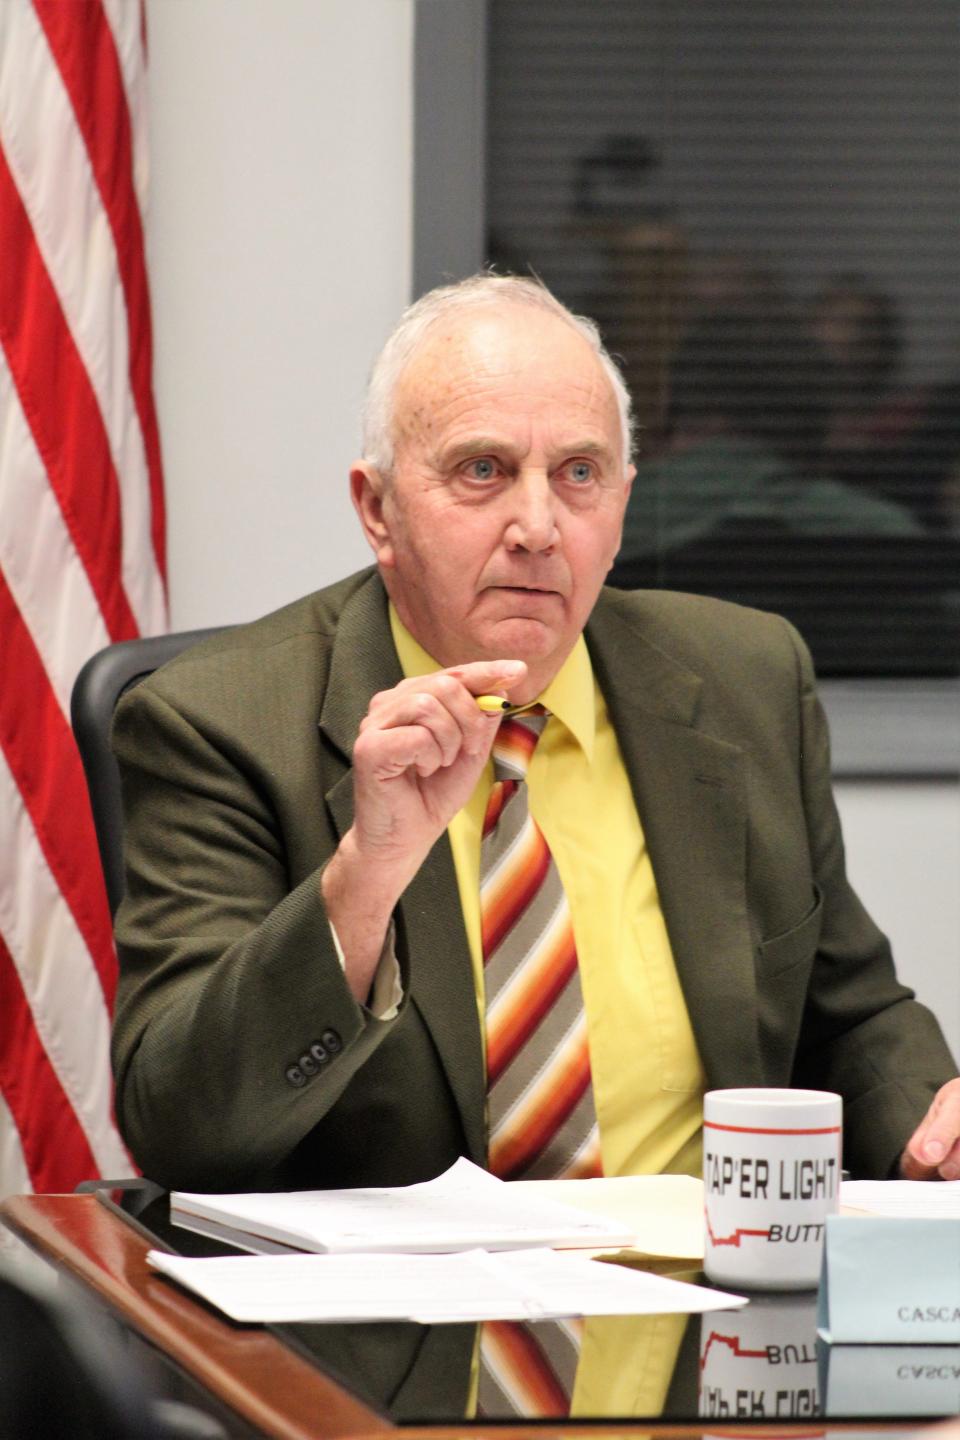 County Commissioner Don Ryan defends the performance of commissioners and the County Election Office before a largely hostile crowd at Tuesday's special meeting.